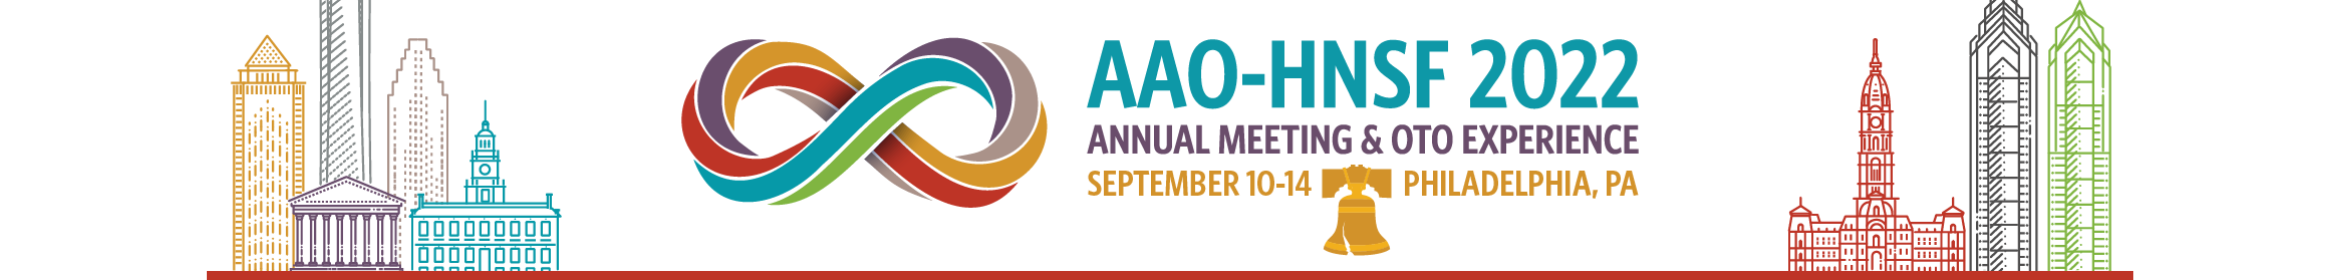 2022 AAO-HNSF Annual Meeting & OTO Experience Main banner